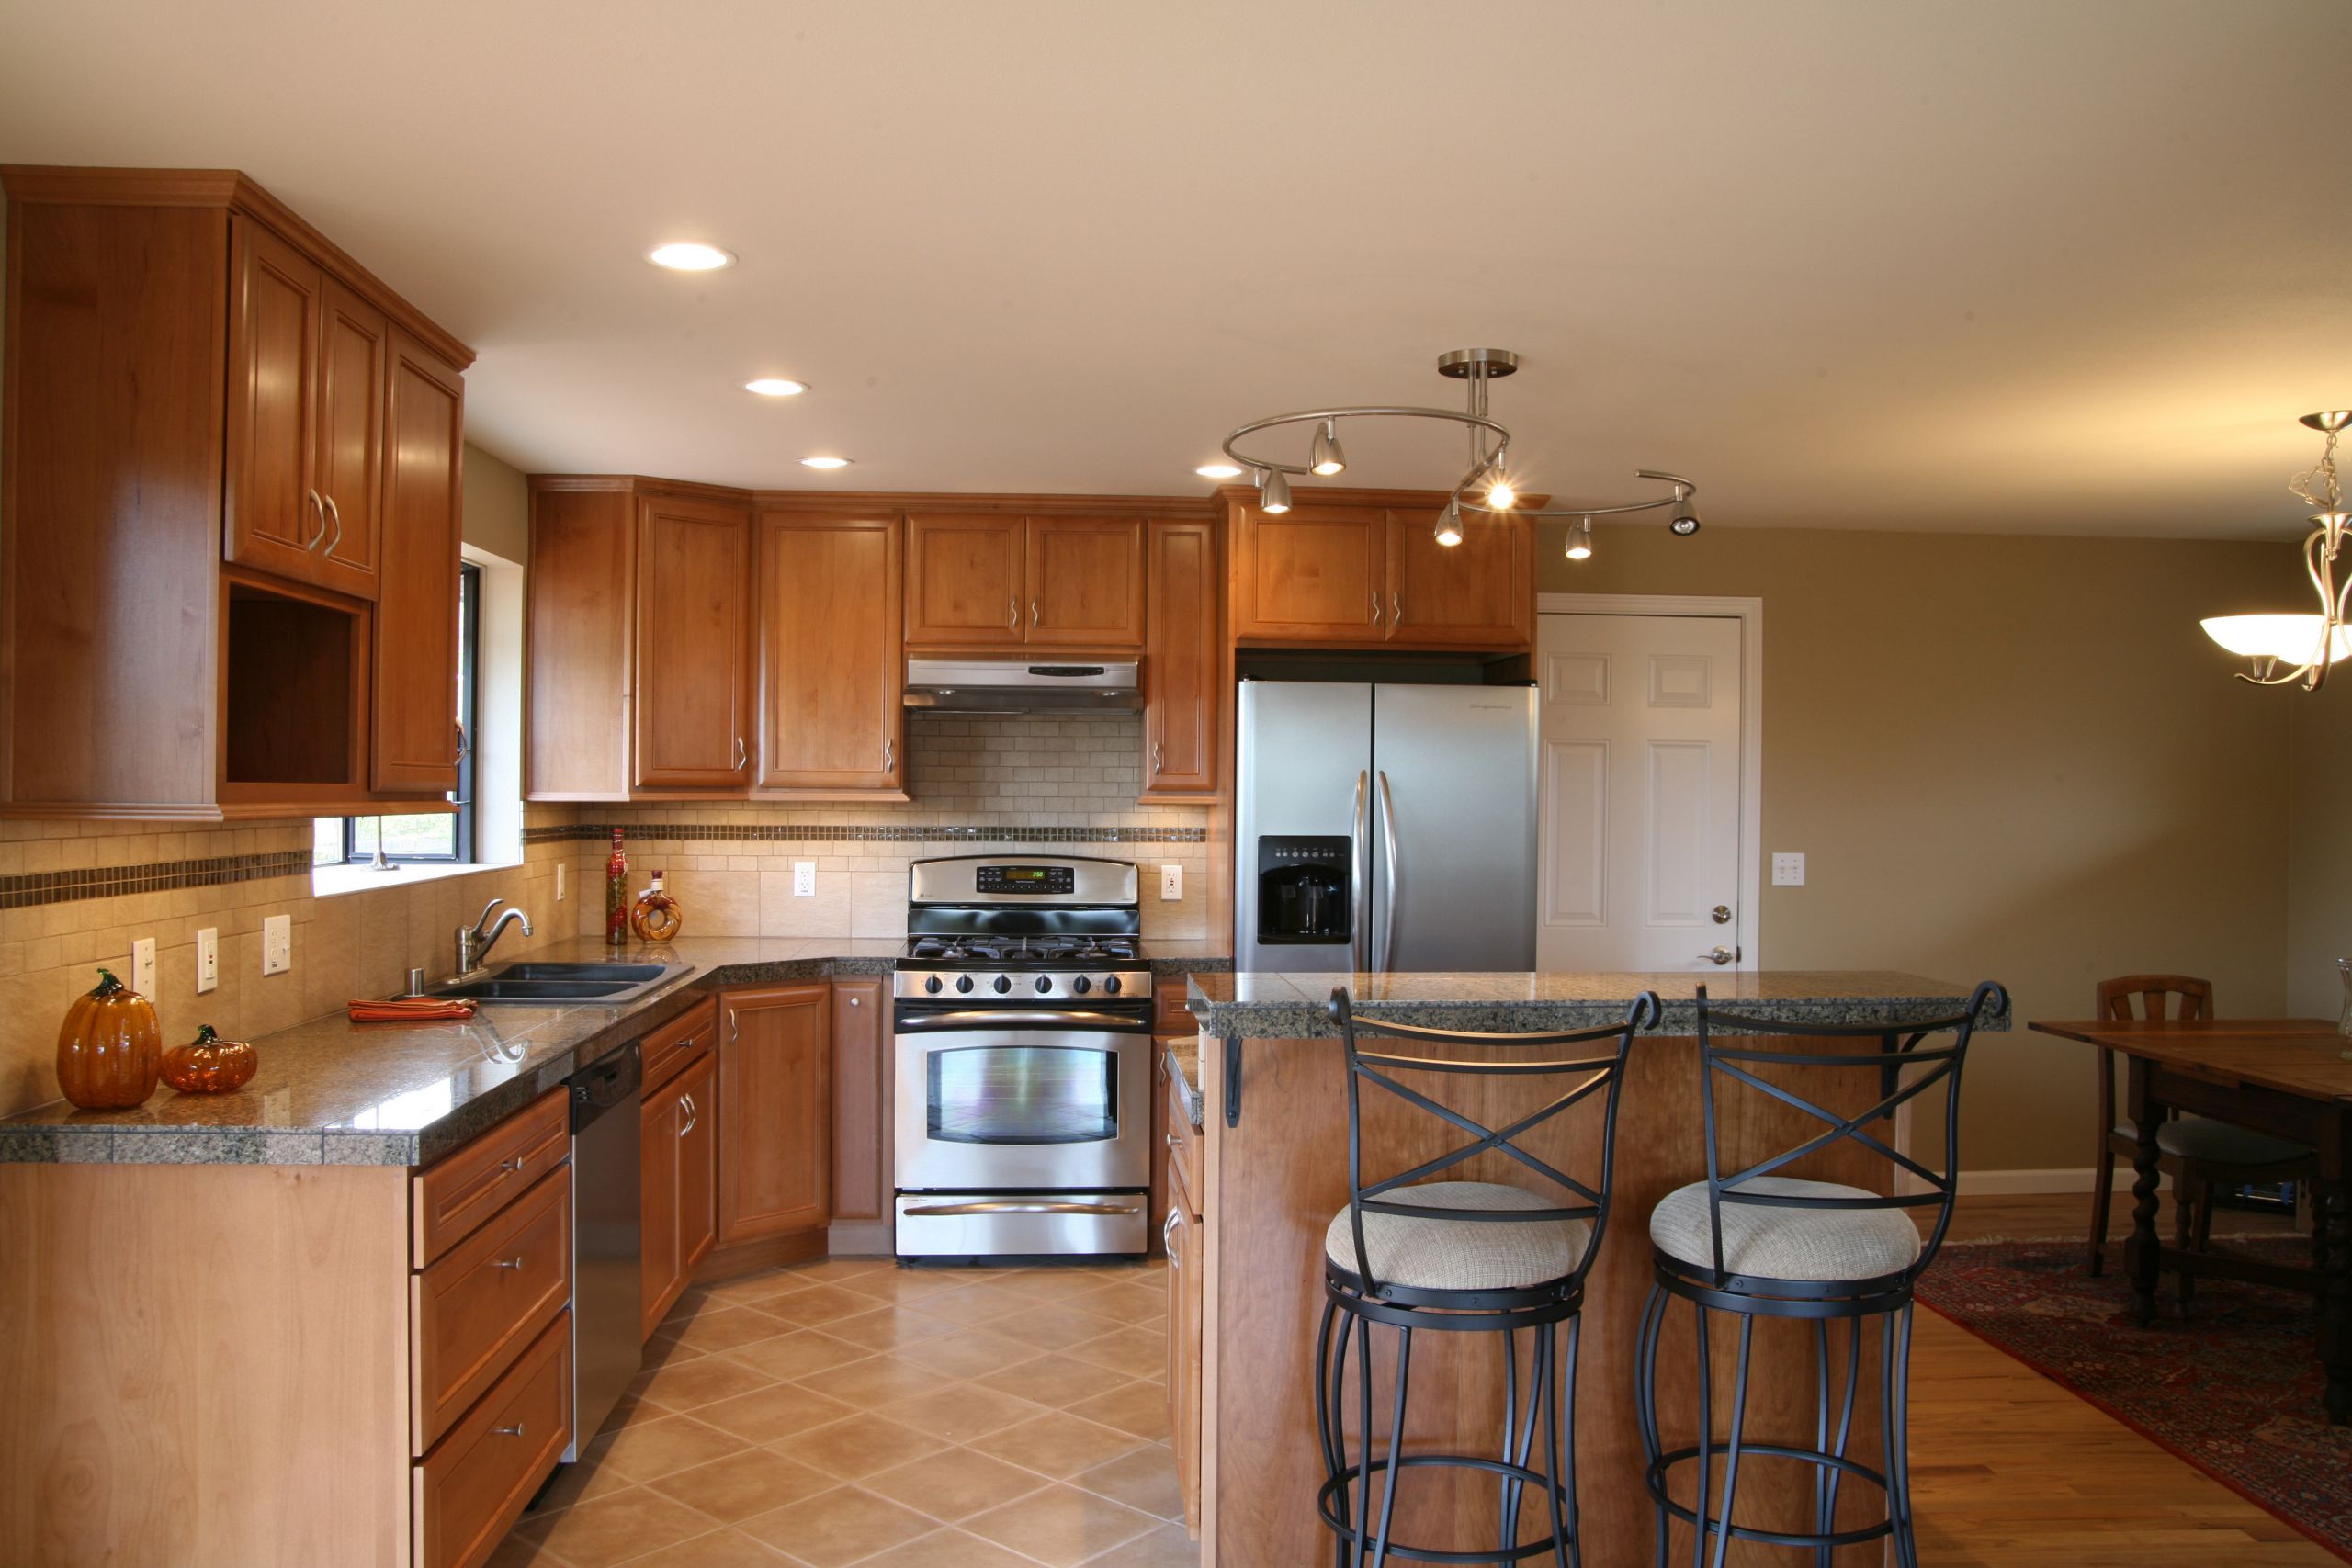 Remodeling Your Kitchen
 Add value to your home with Upscale Kitchen Remodeling